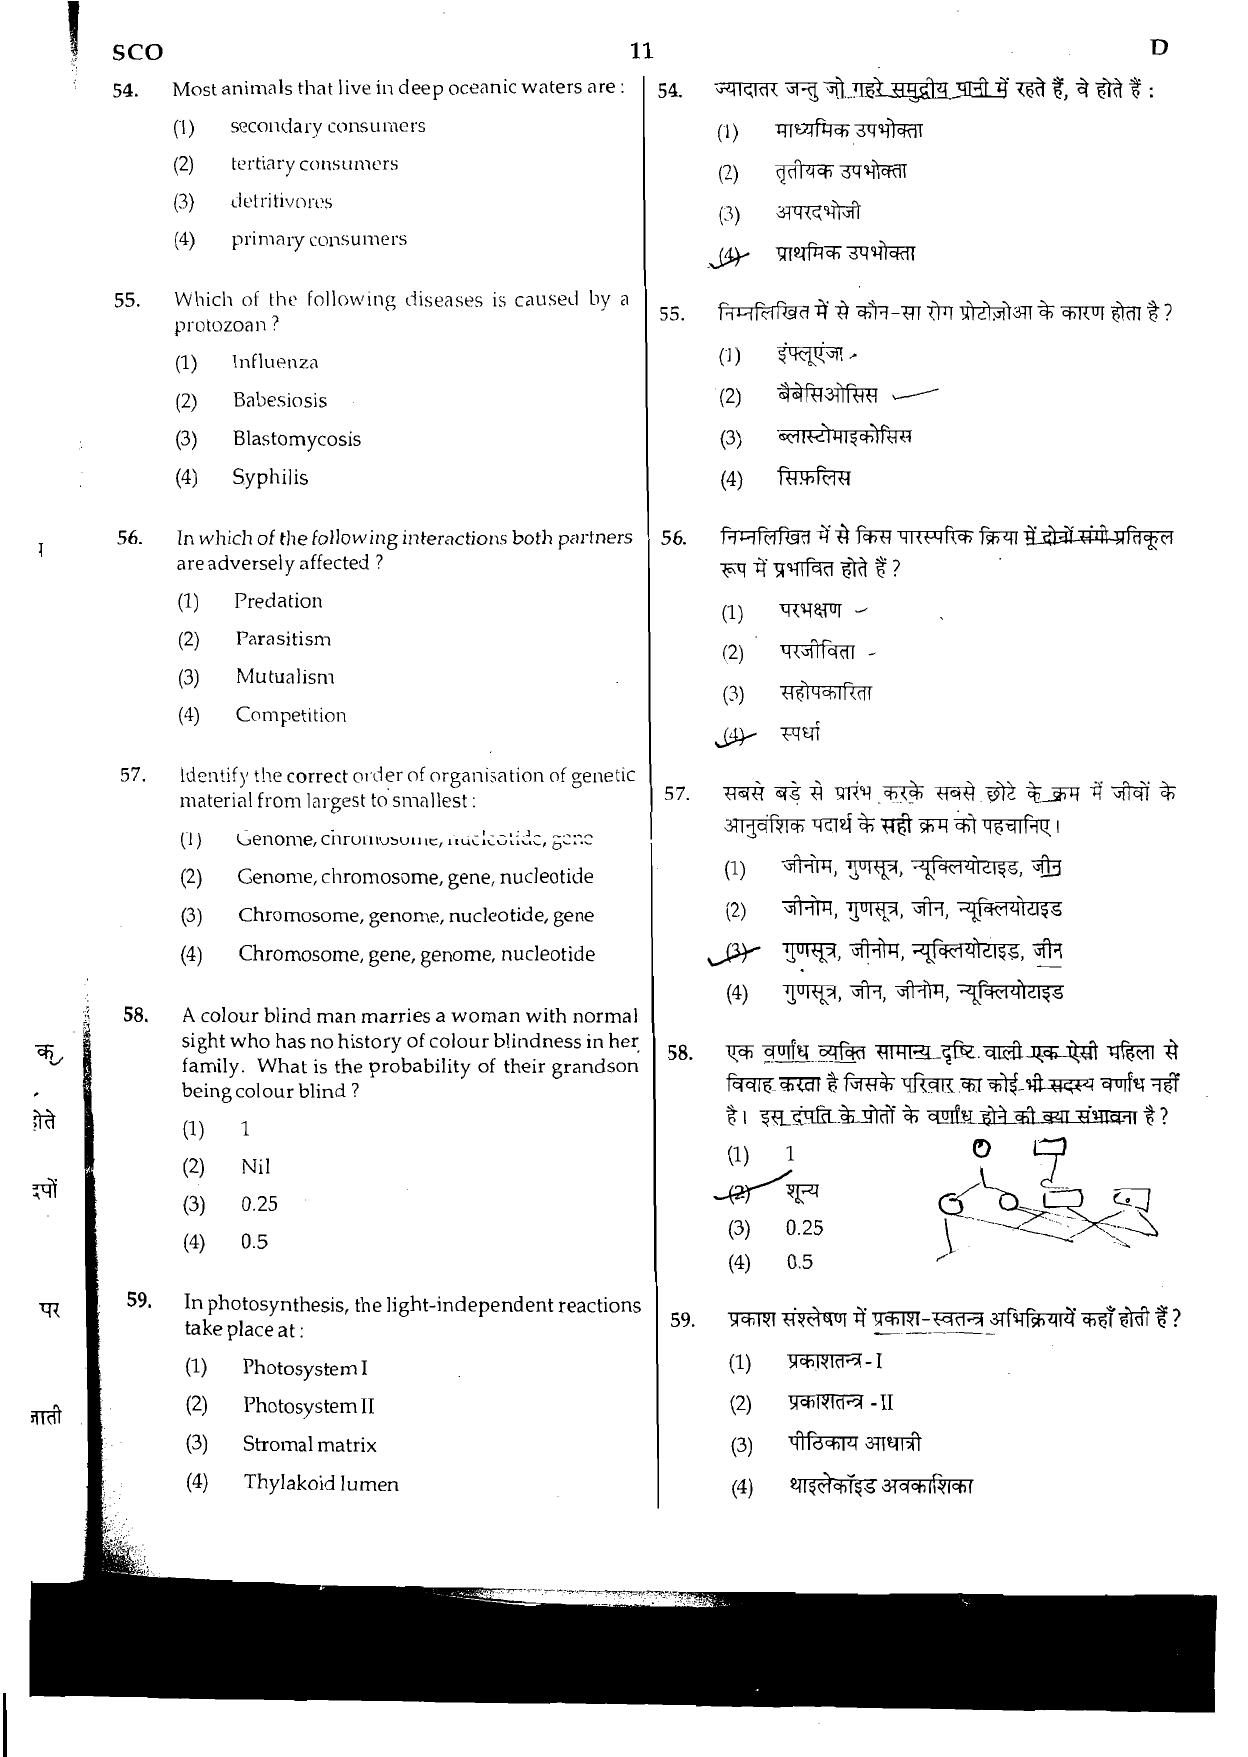 NEET Code D 2015 Question Paper - Page 11